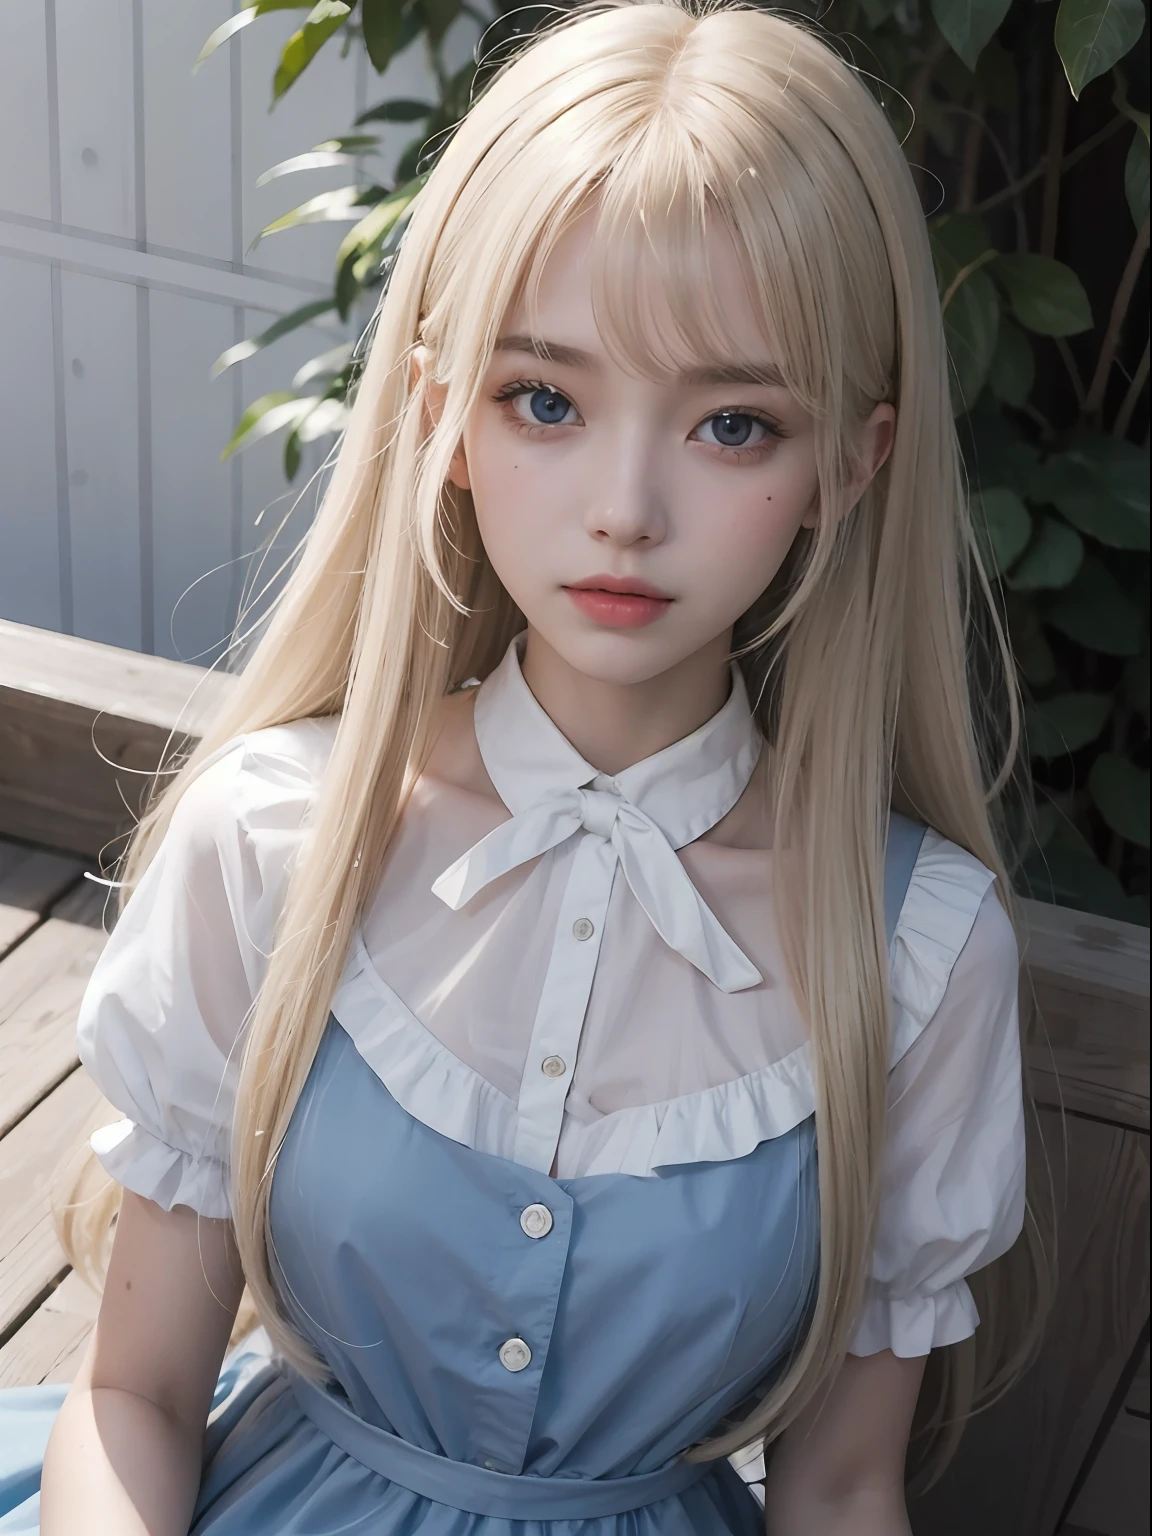 top-quality、超A high resolution、a picture、a photo of a cute girl、Detailed cute and beautiful face、(pureerosface_v1:0.008)、Beautiful bangs、alice in the wonderland、14years、White shiny skin、bangss、Platinum Blonde Super Long Straight Silky Hainer hair、Attractive beautiful crystal clear big blue eyes、White Apron、a blue dress、without makeup